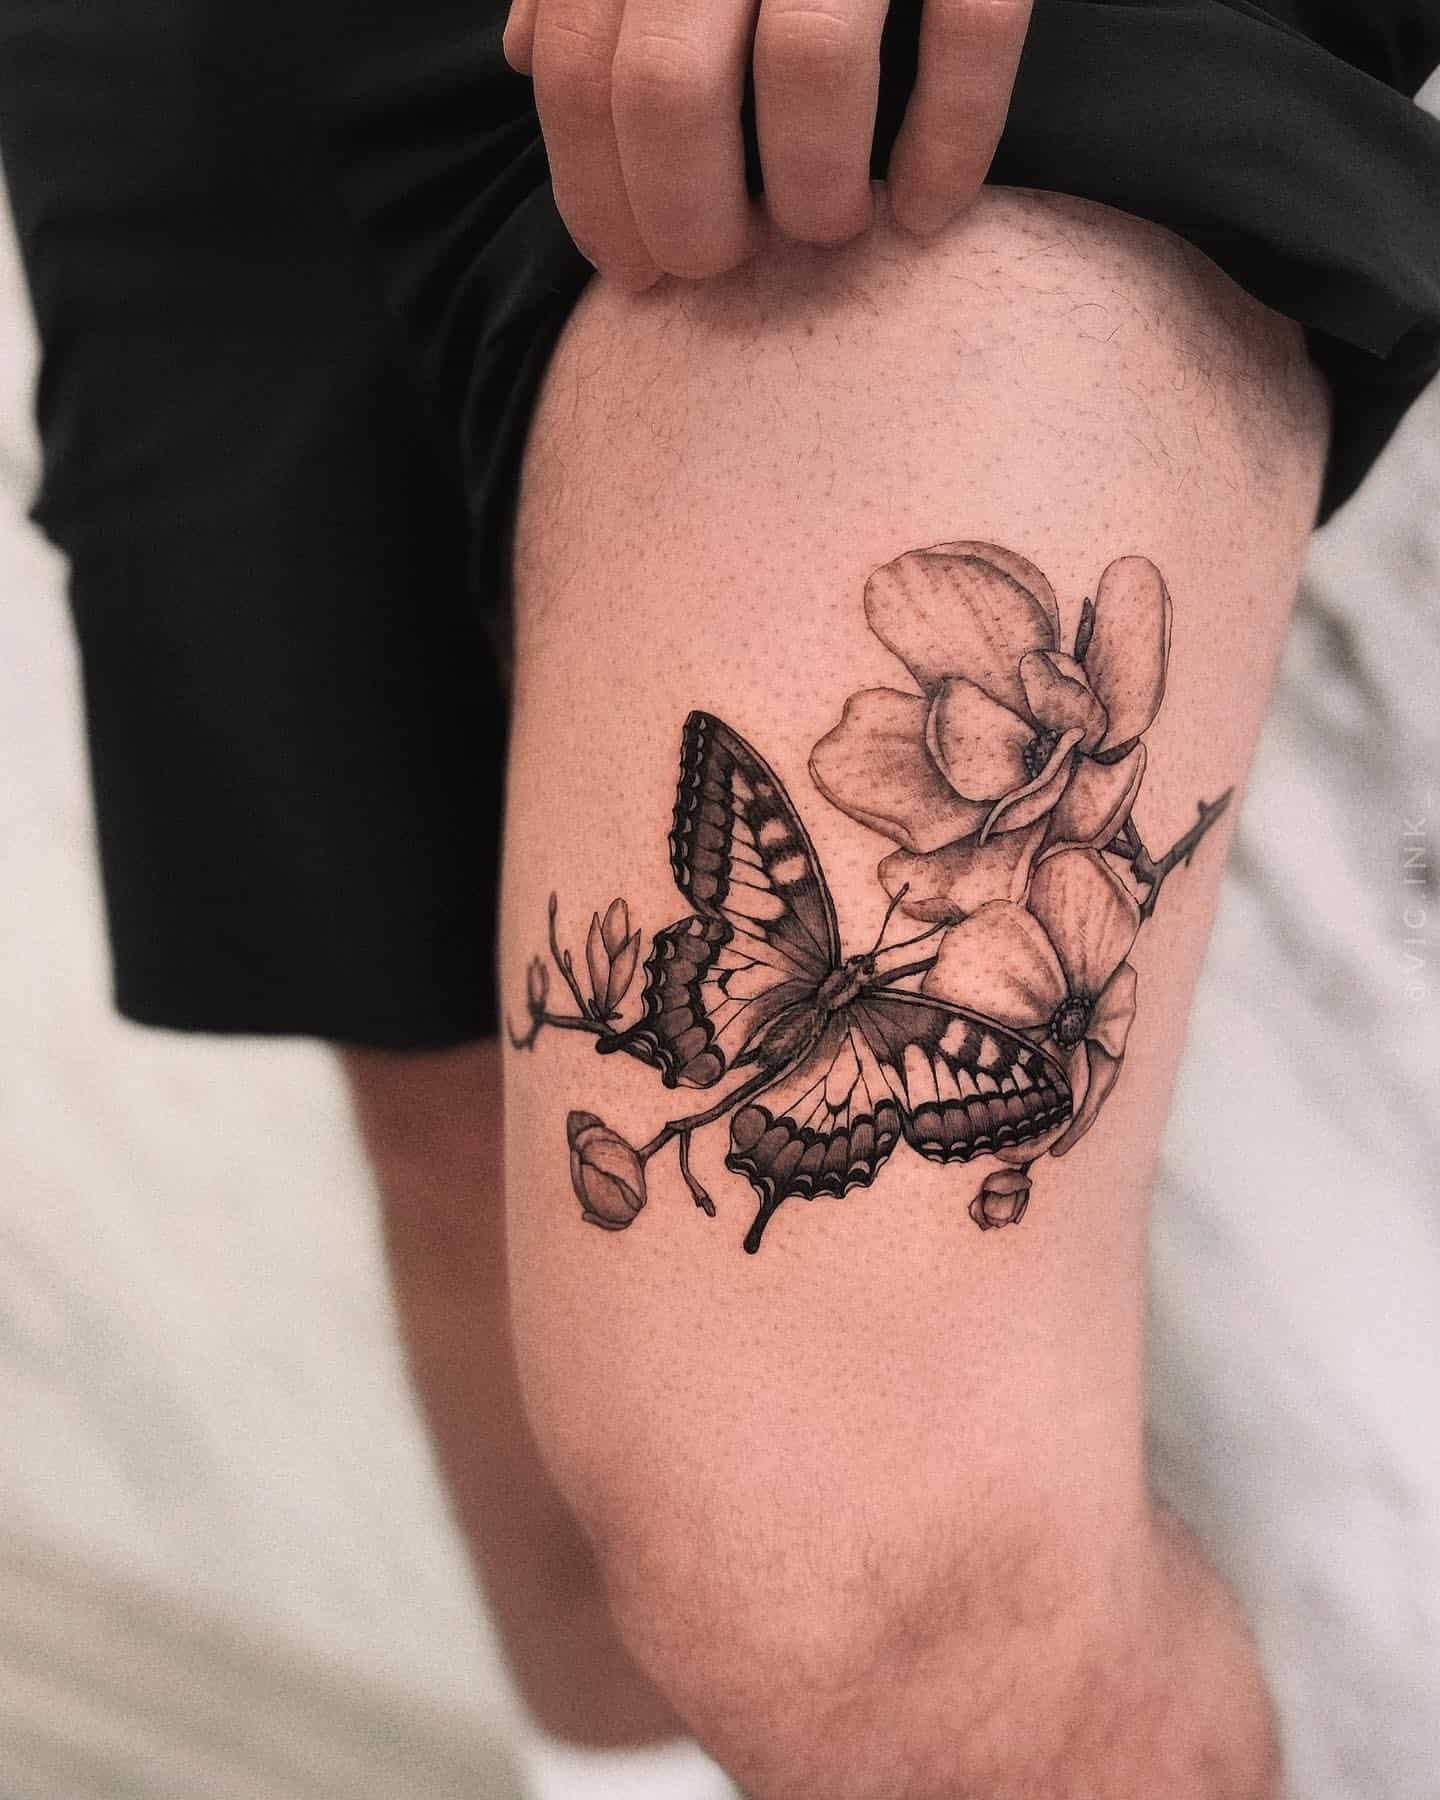 Redemption Tattoo Studio  Rose and butterflies on the thigh by  damontattoos today For all your beautiful realism Rose needs Damon is  your guy DM us to get a quote or to